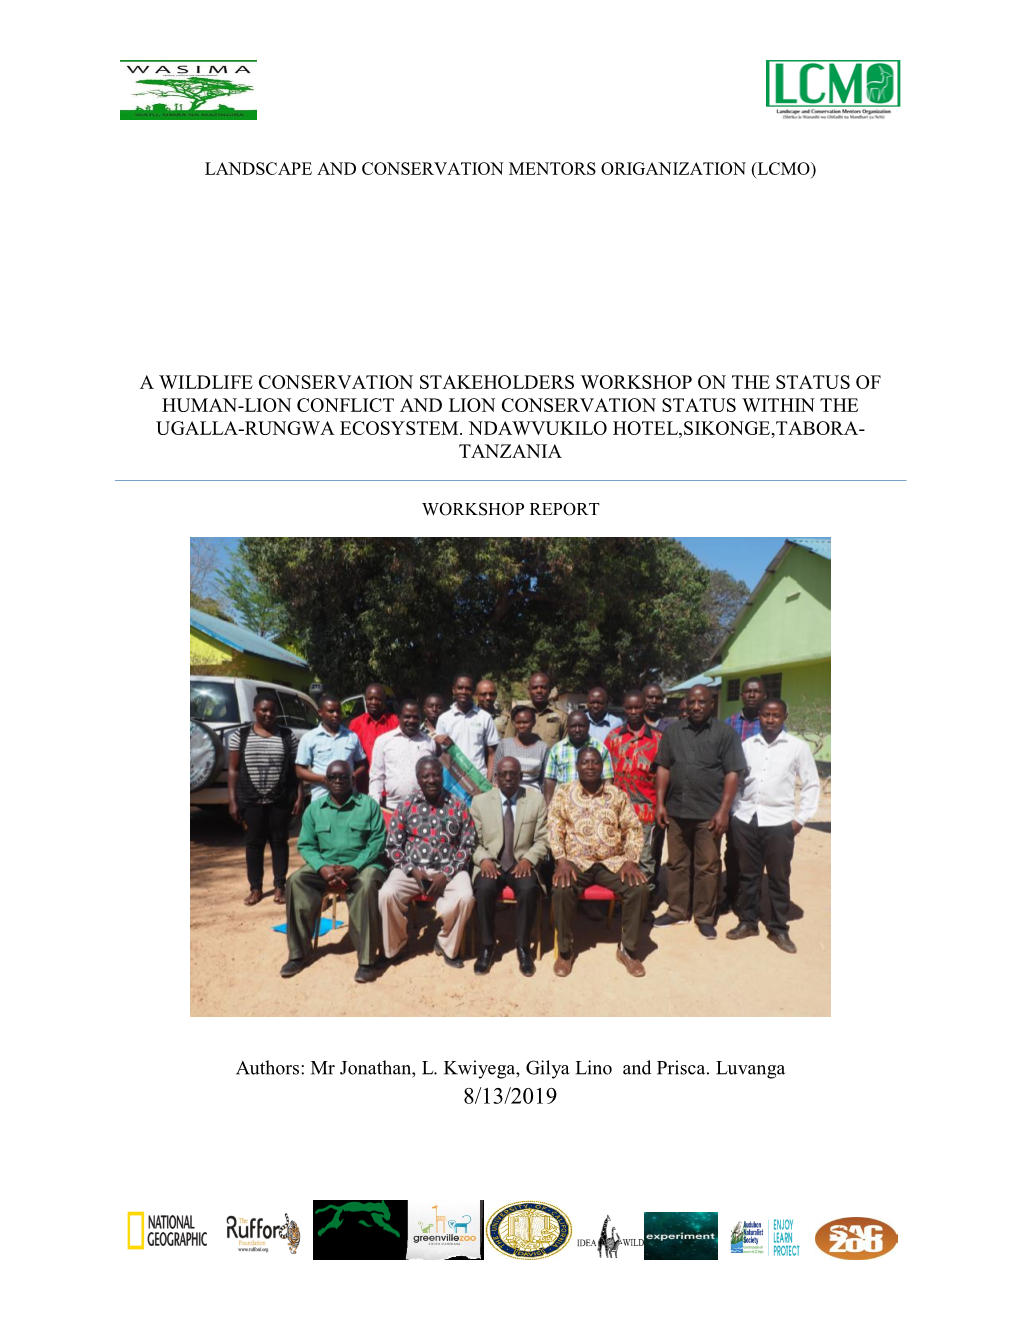 A Wildlife Conservation Stakeholders Workshop on the Status of Human-Lion Conflict and Lion Conservation Status Within the Ugalla-Rungwa Ecosystem